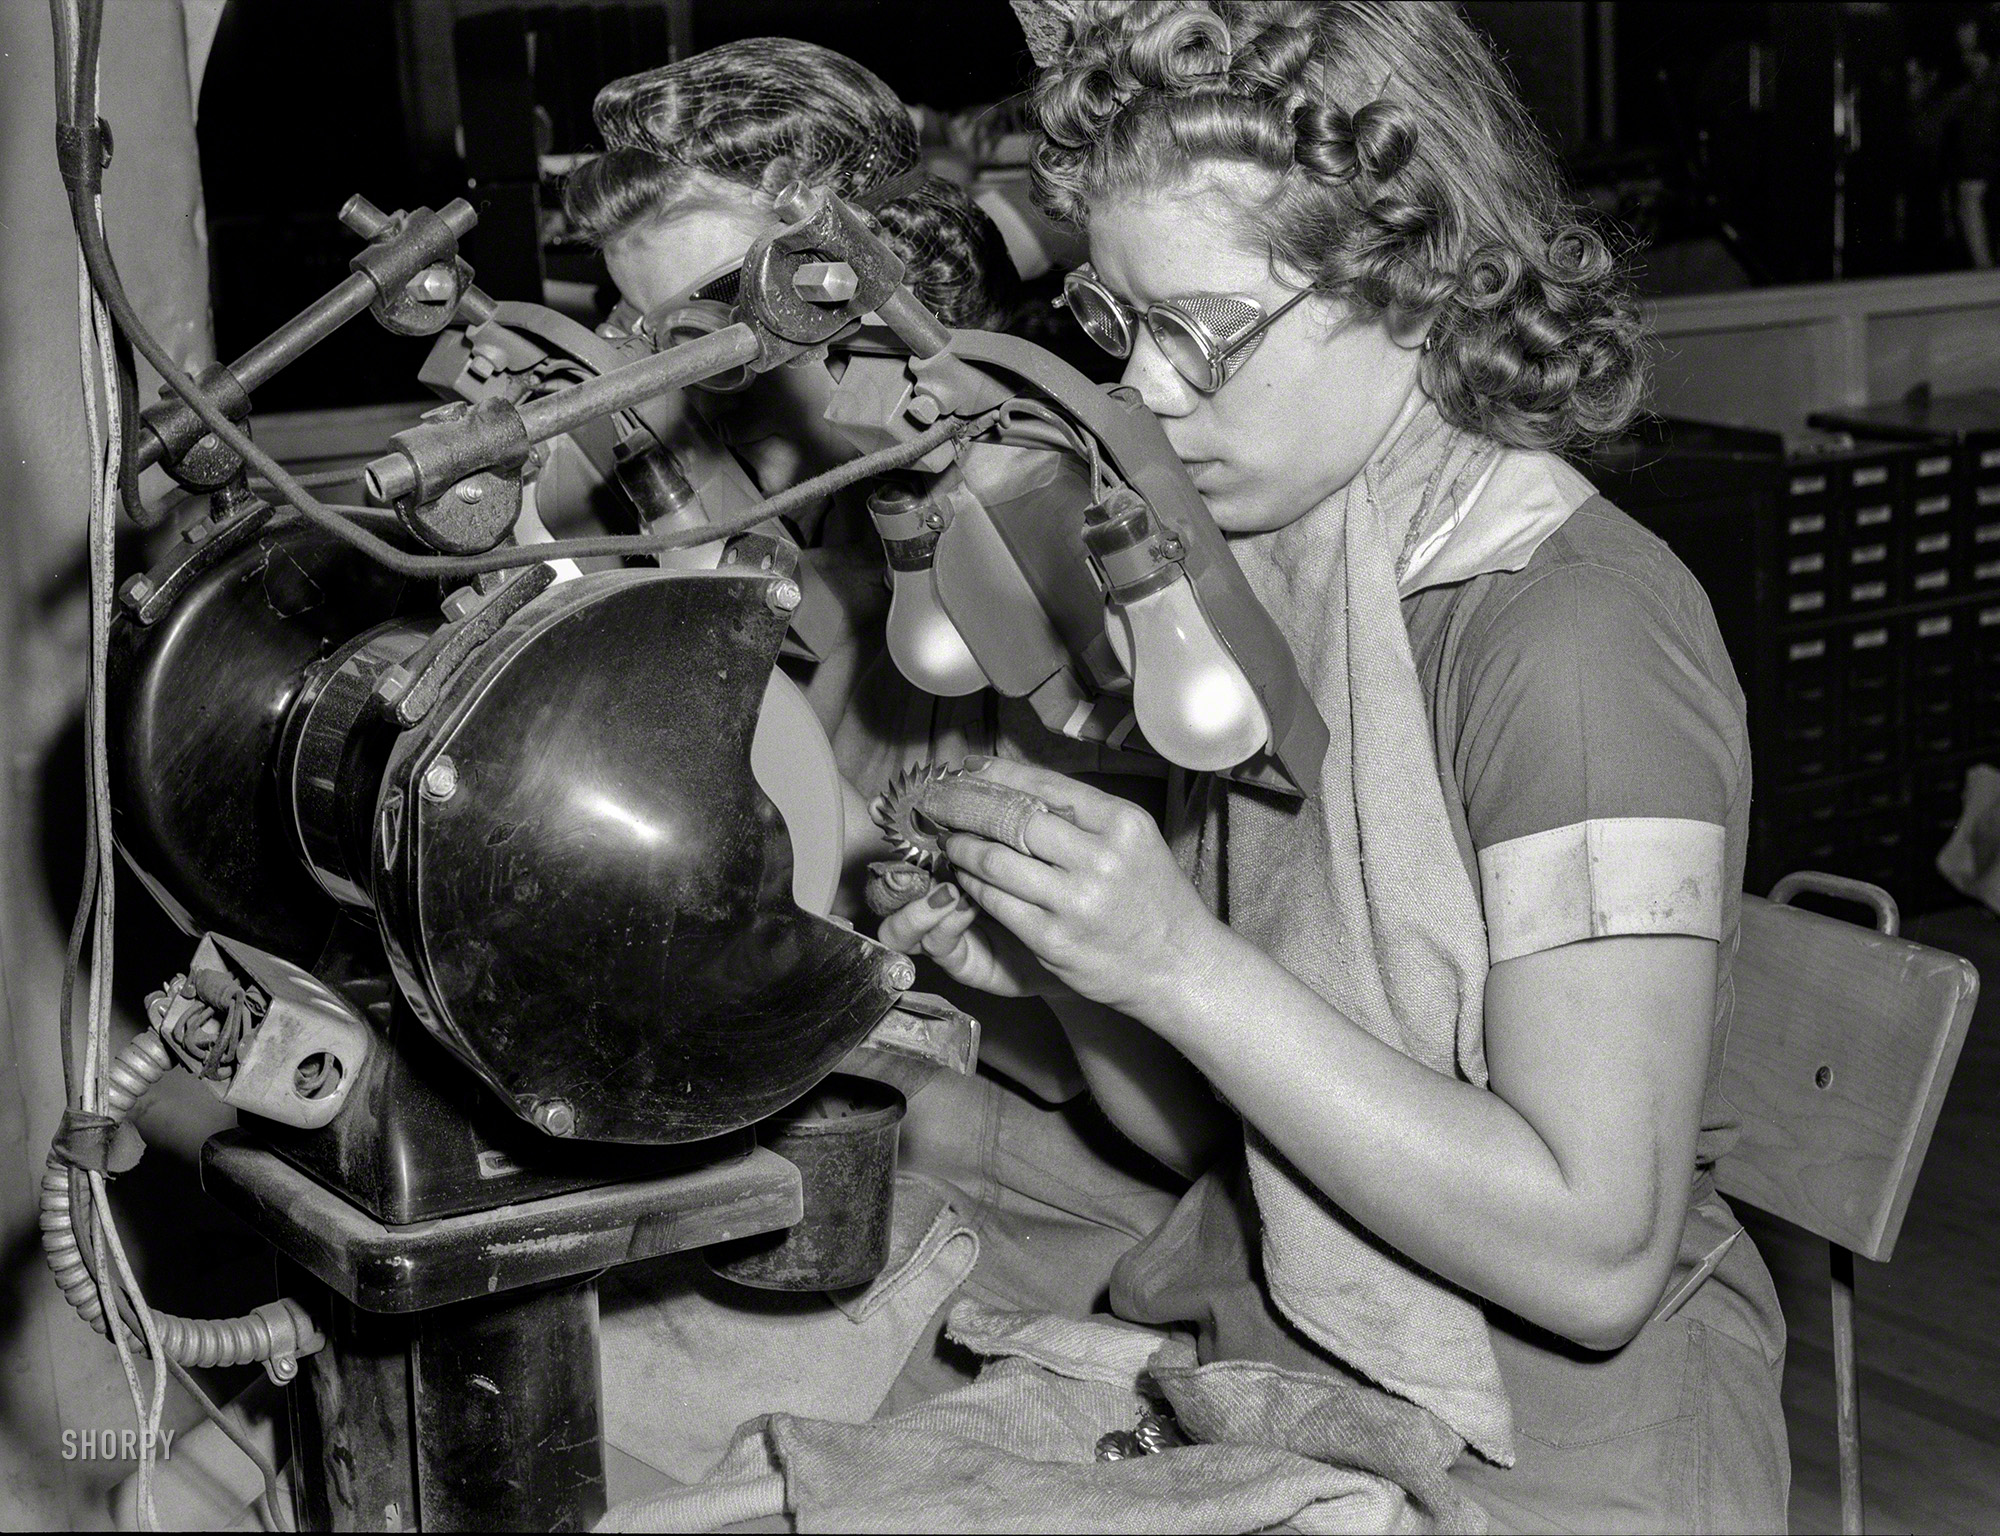 August 1942. "Women in industry. Sharp eyes and agile fingers make these young women ideal machine operators. They're conditioning and reshaping milling cutters in a huge Midwest machine tool company. Republic Drill and Tool, Chicago." Photo by Ann Rosener, Office of War Information. View full size.